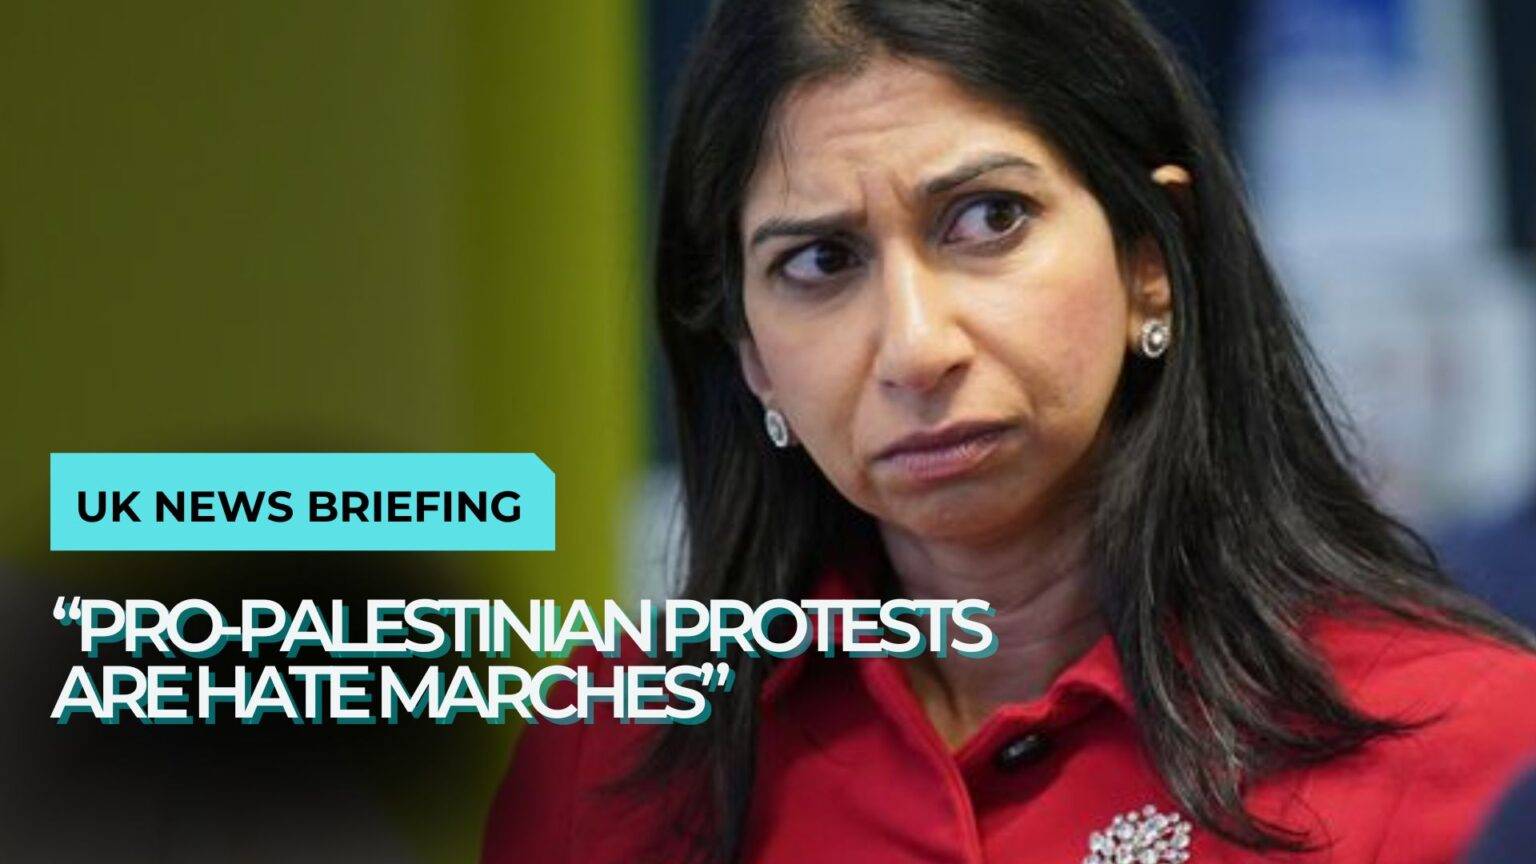 Suella Braverman is branding all the pro-Palestinian marches as “hate marches”